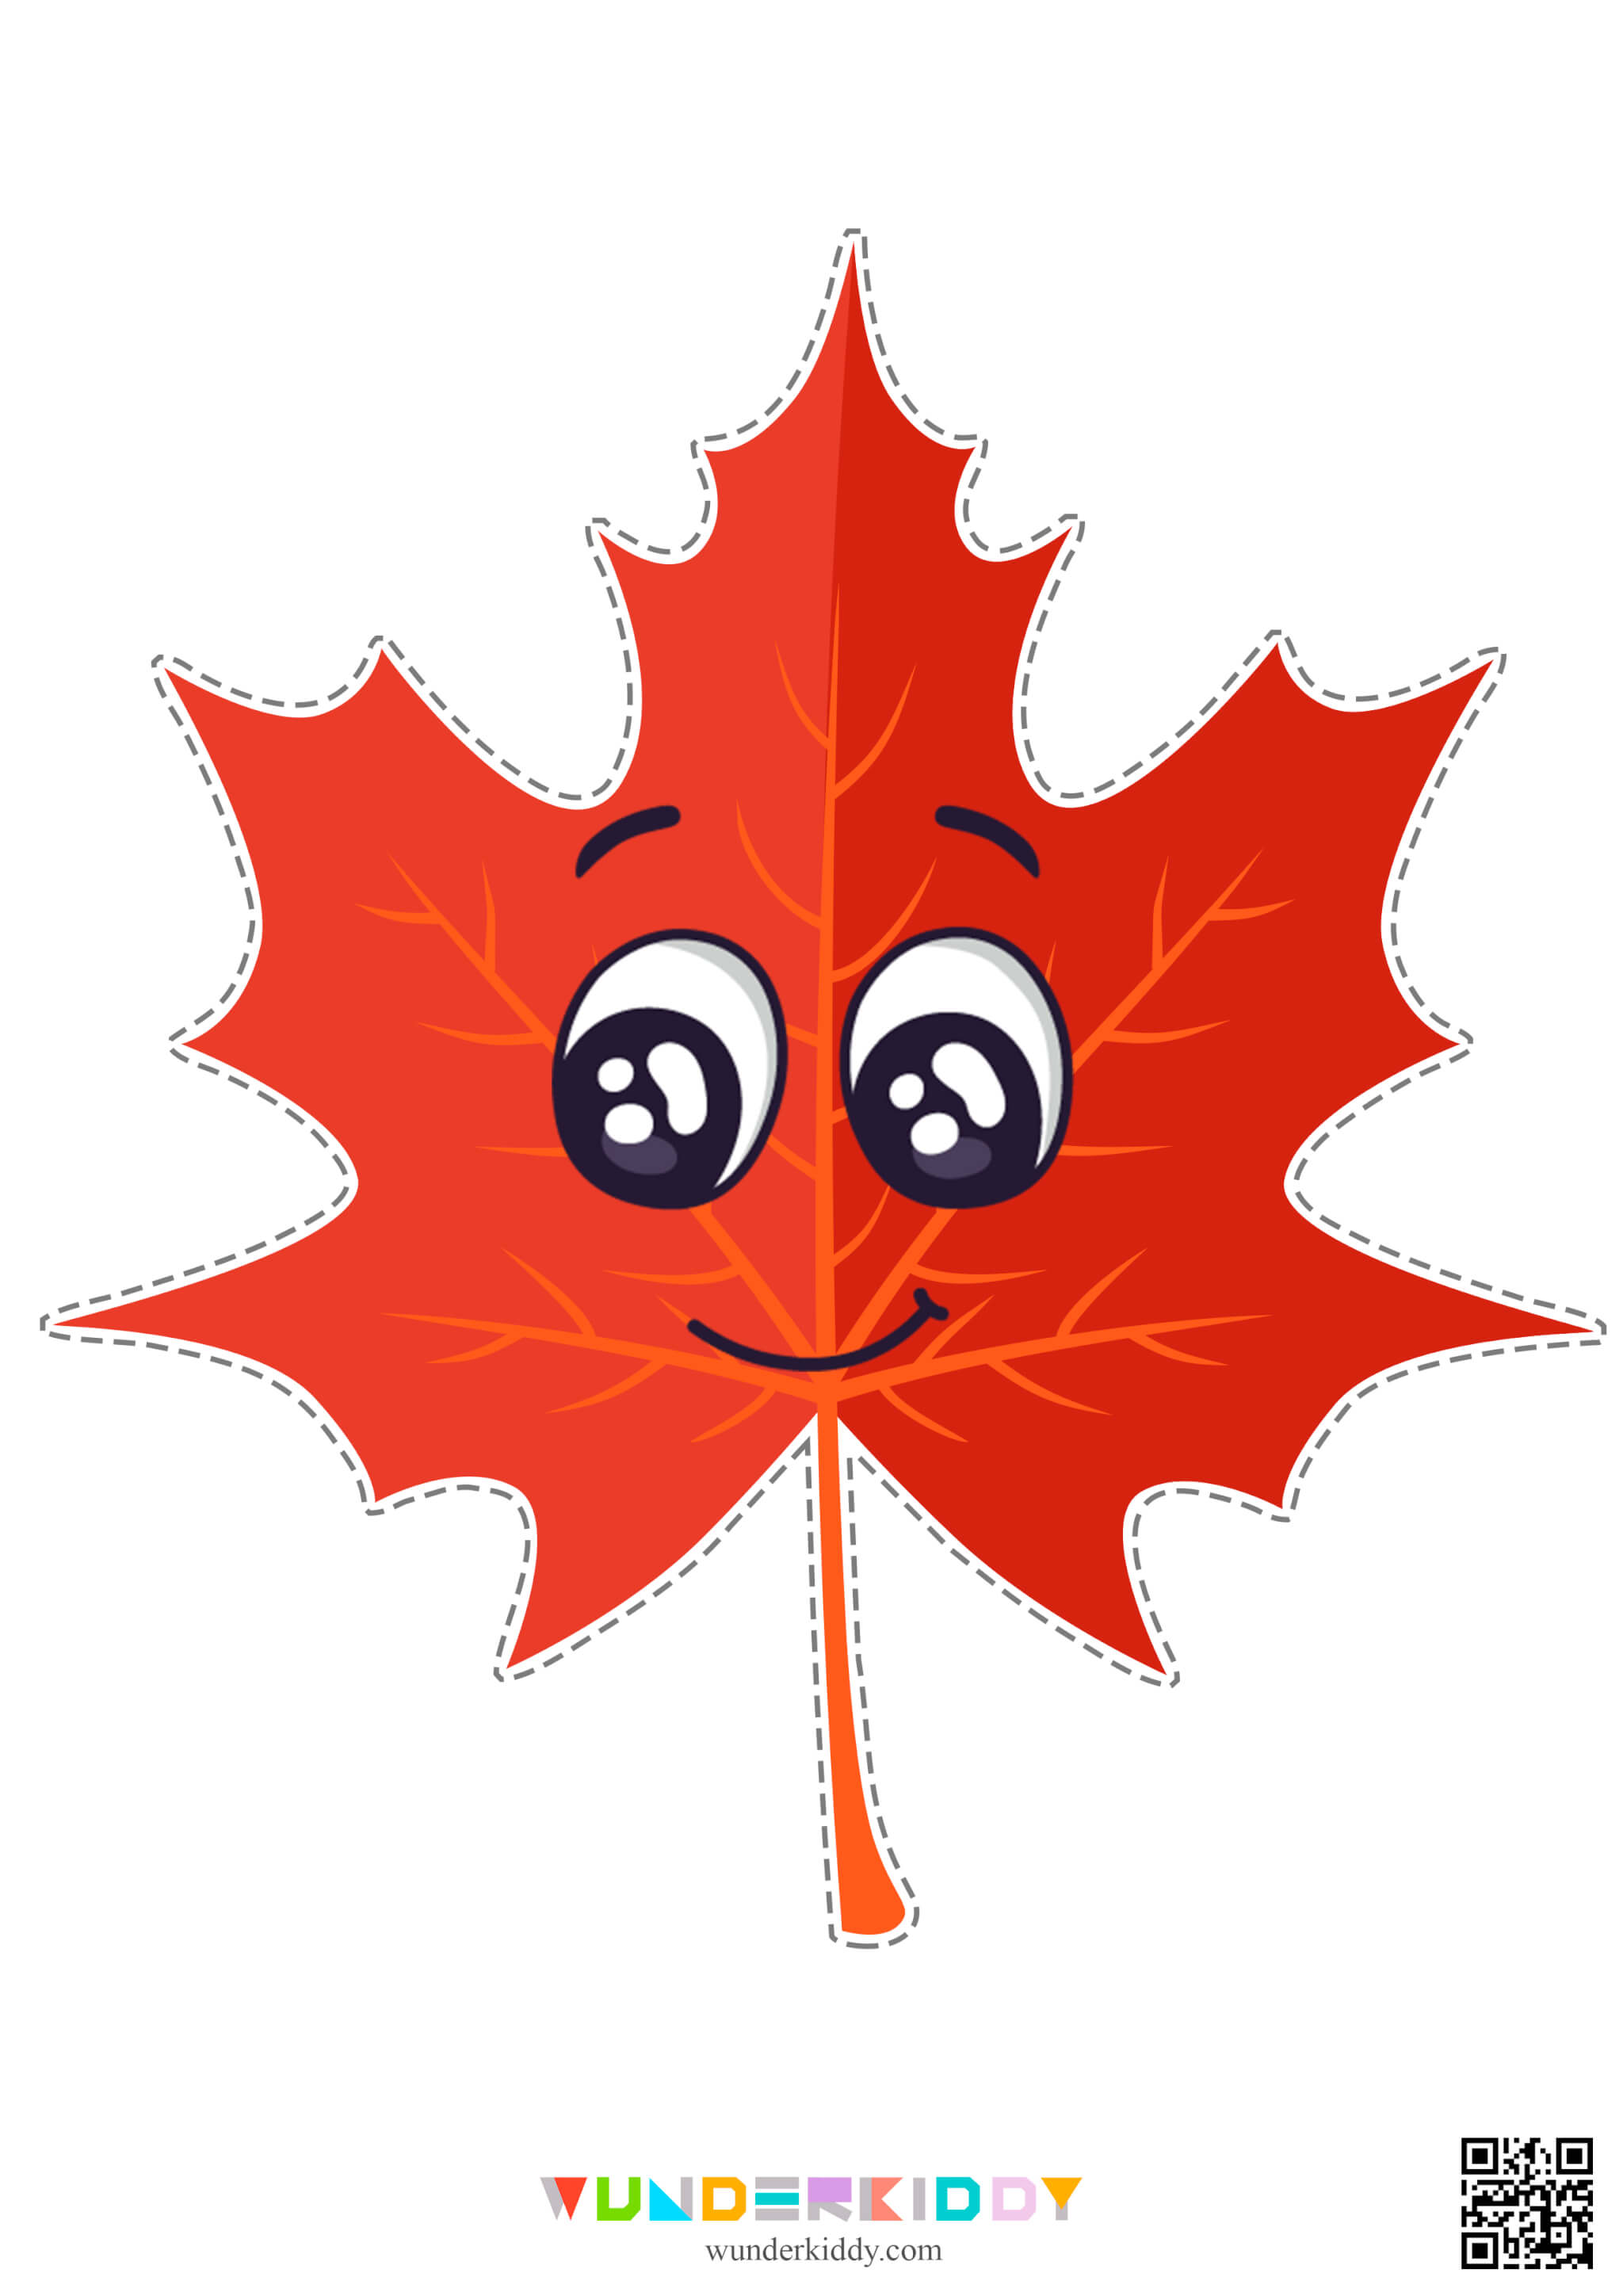 Activity sheet «Funny autumn leaves» - Image 3